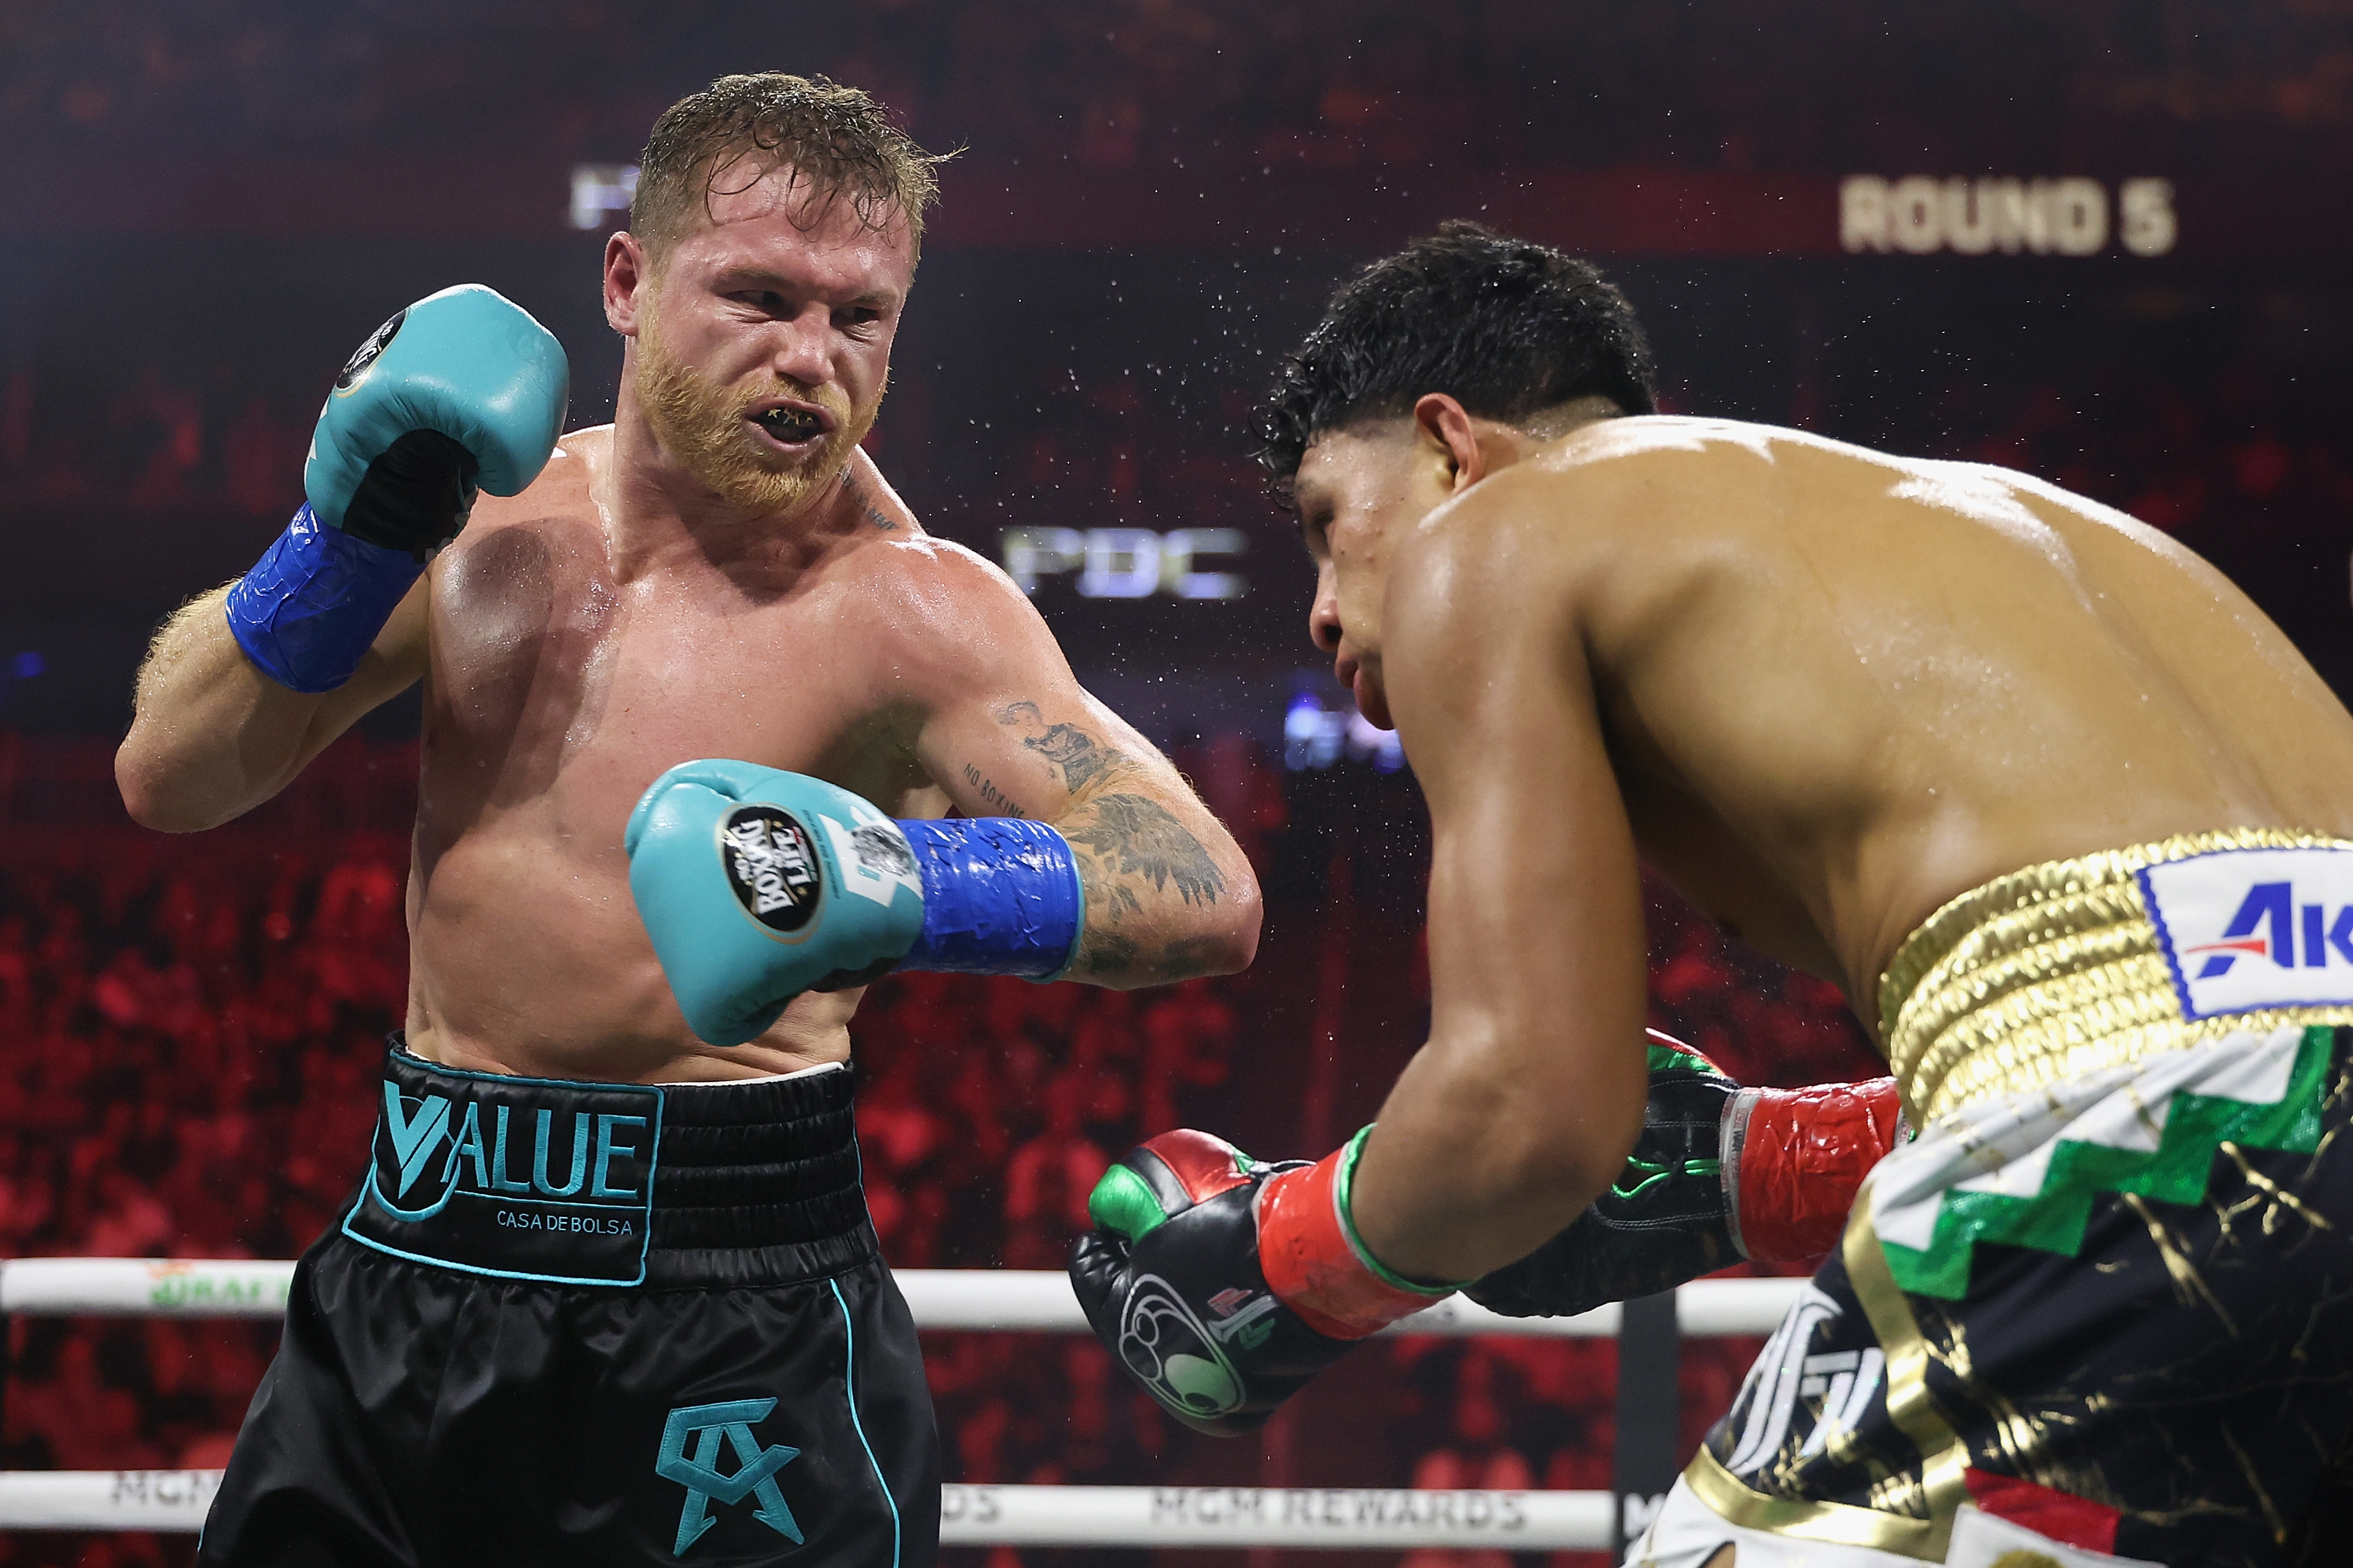 Jim Lampley doesn’t think Canelo is scared to fight David Benavidez, but he does think it’s a fight that should happen.